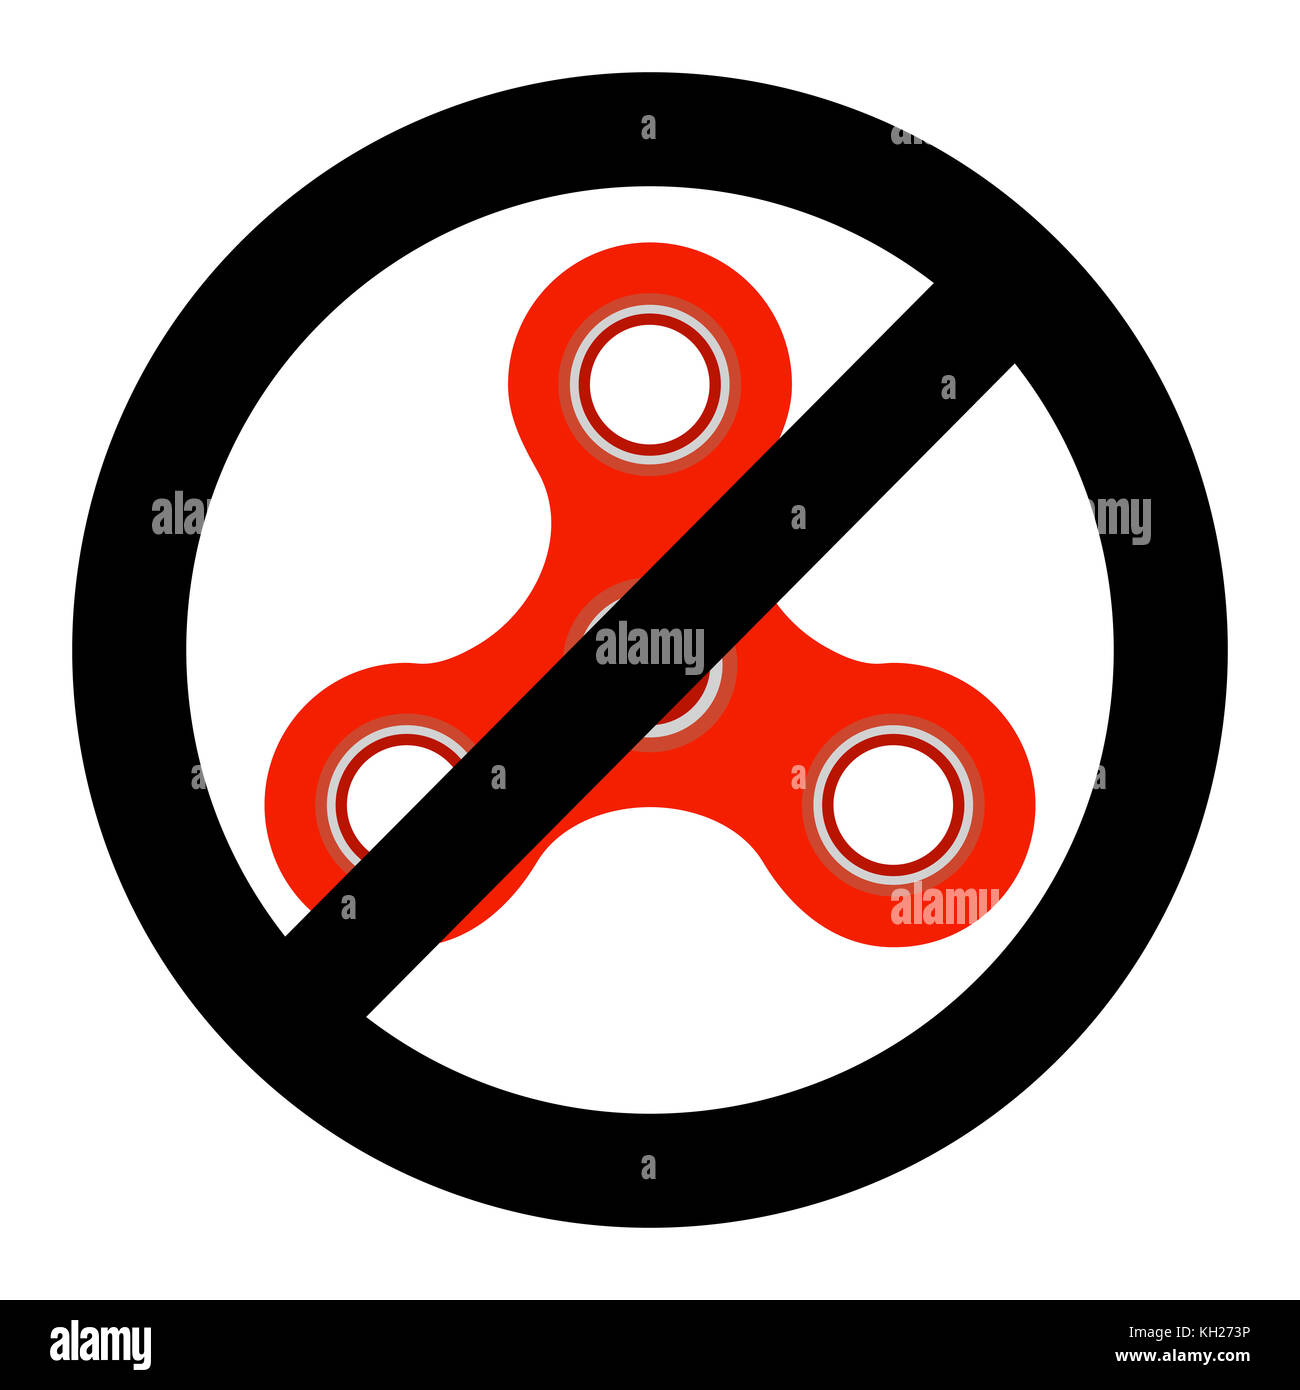 Ban spiner icon, stop spinner rotation, no fidget toy mechanism, vector illustration Stock Photo